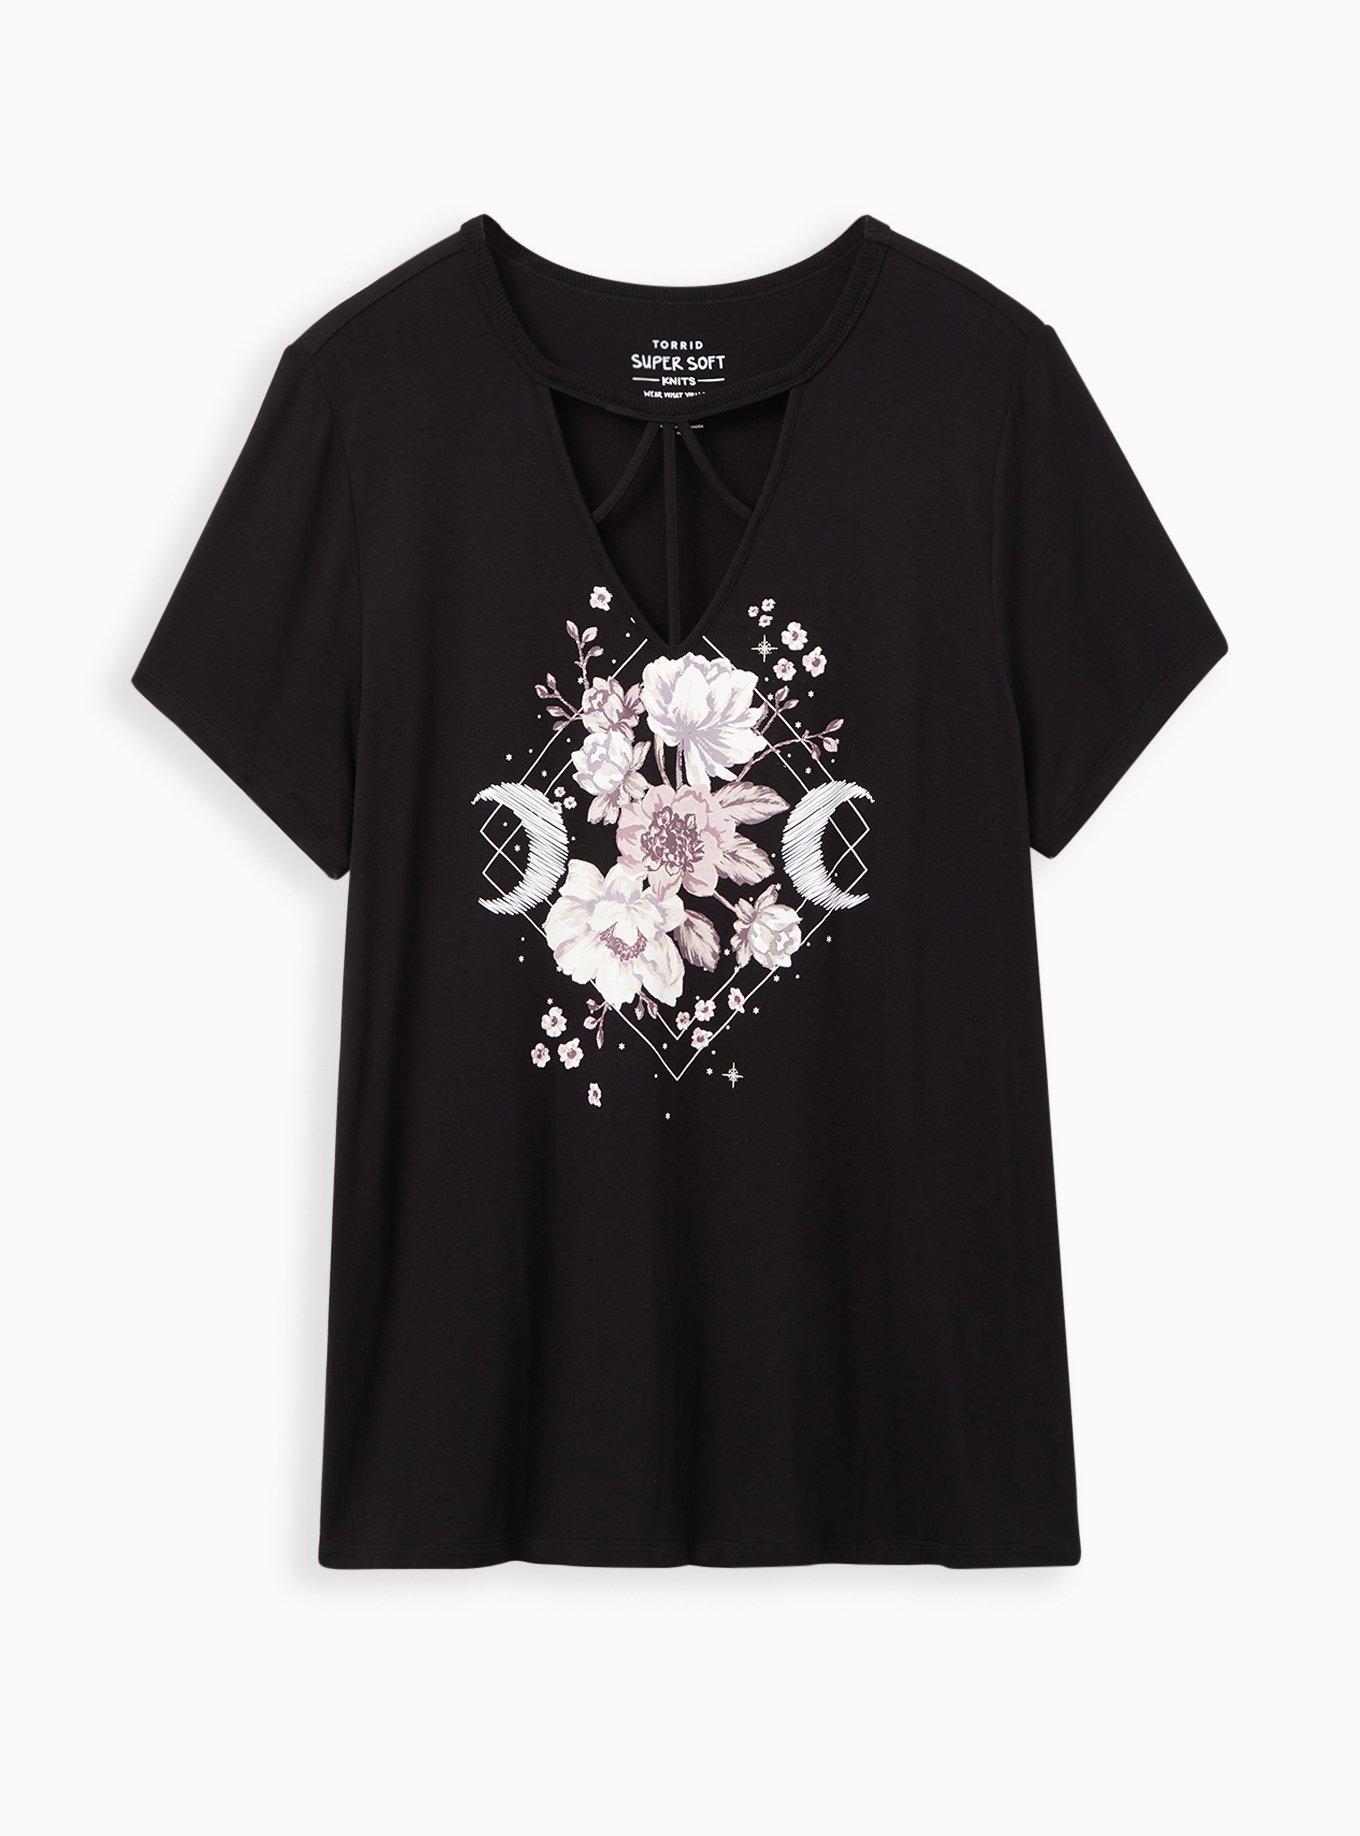 Plus Size - Classic Fit Strappy Tee - Floral Moon Black - Torrid